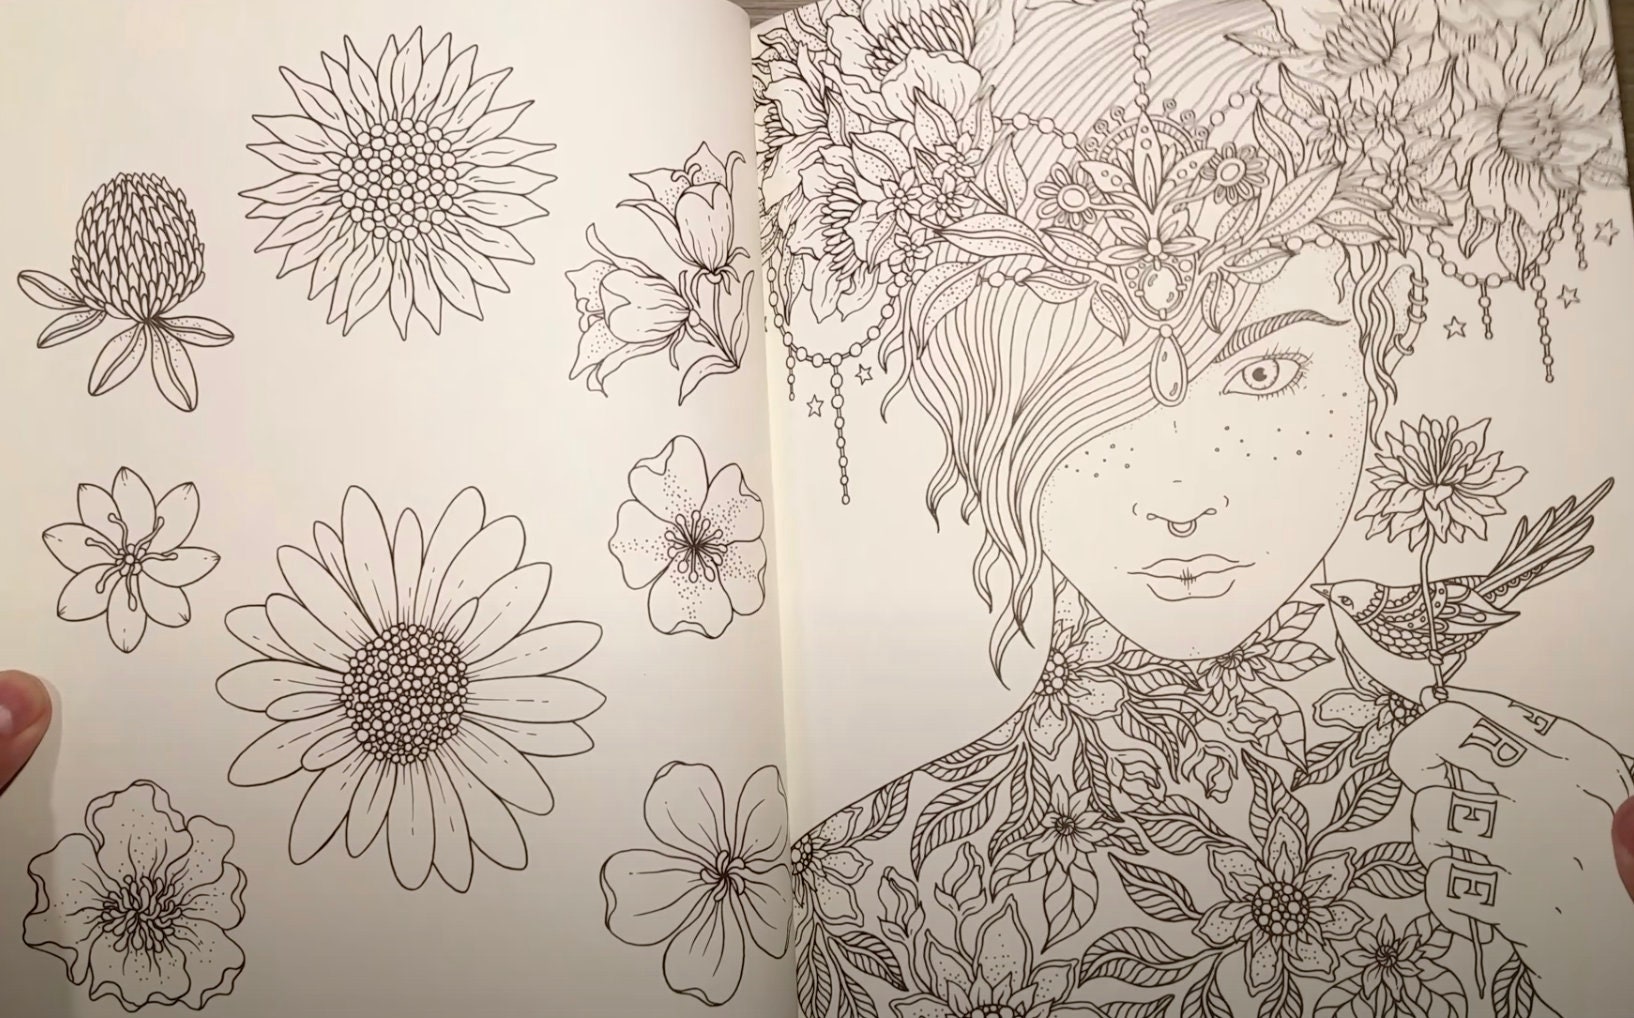 Escape to a Colorful Dream with Hanna Karlzon's Adult Coloring Book